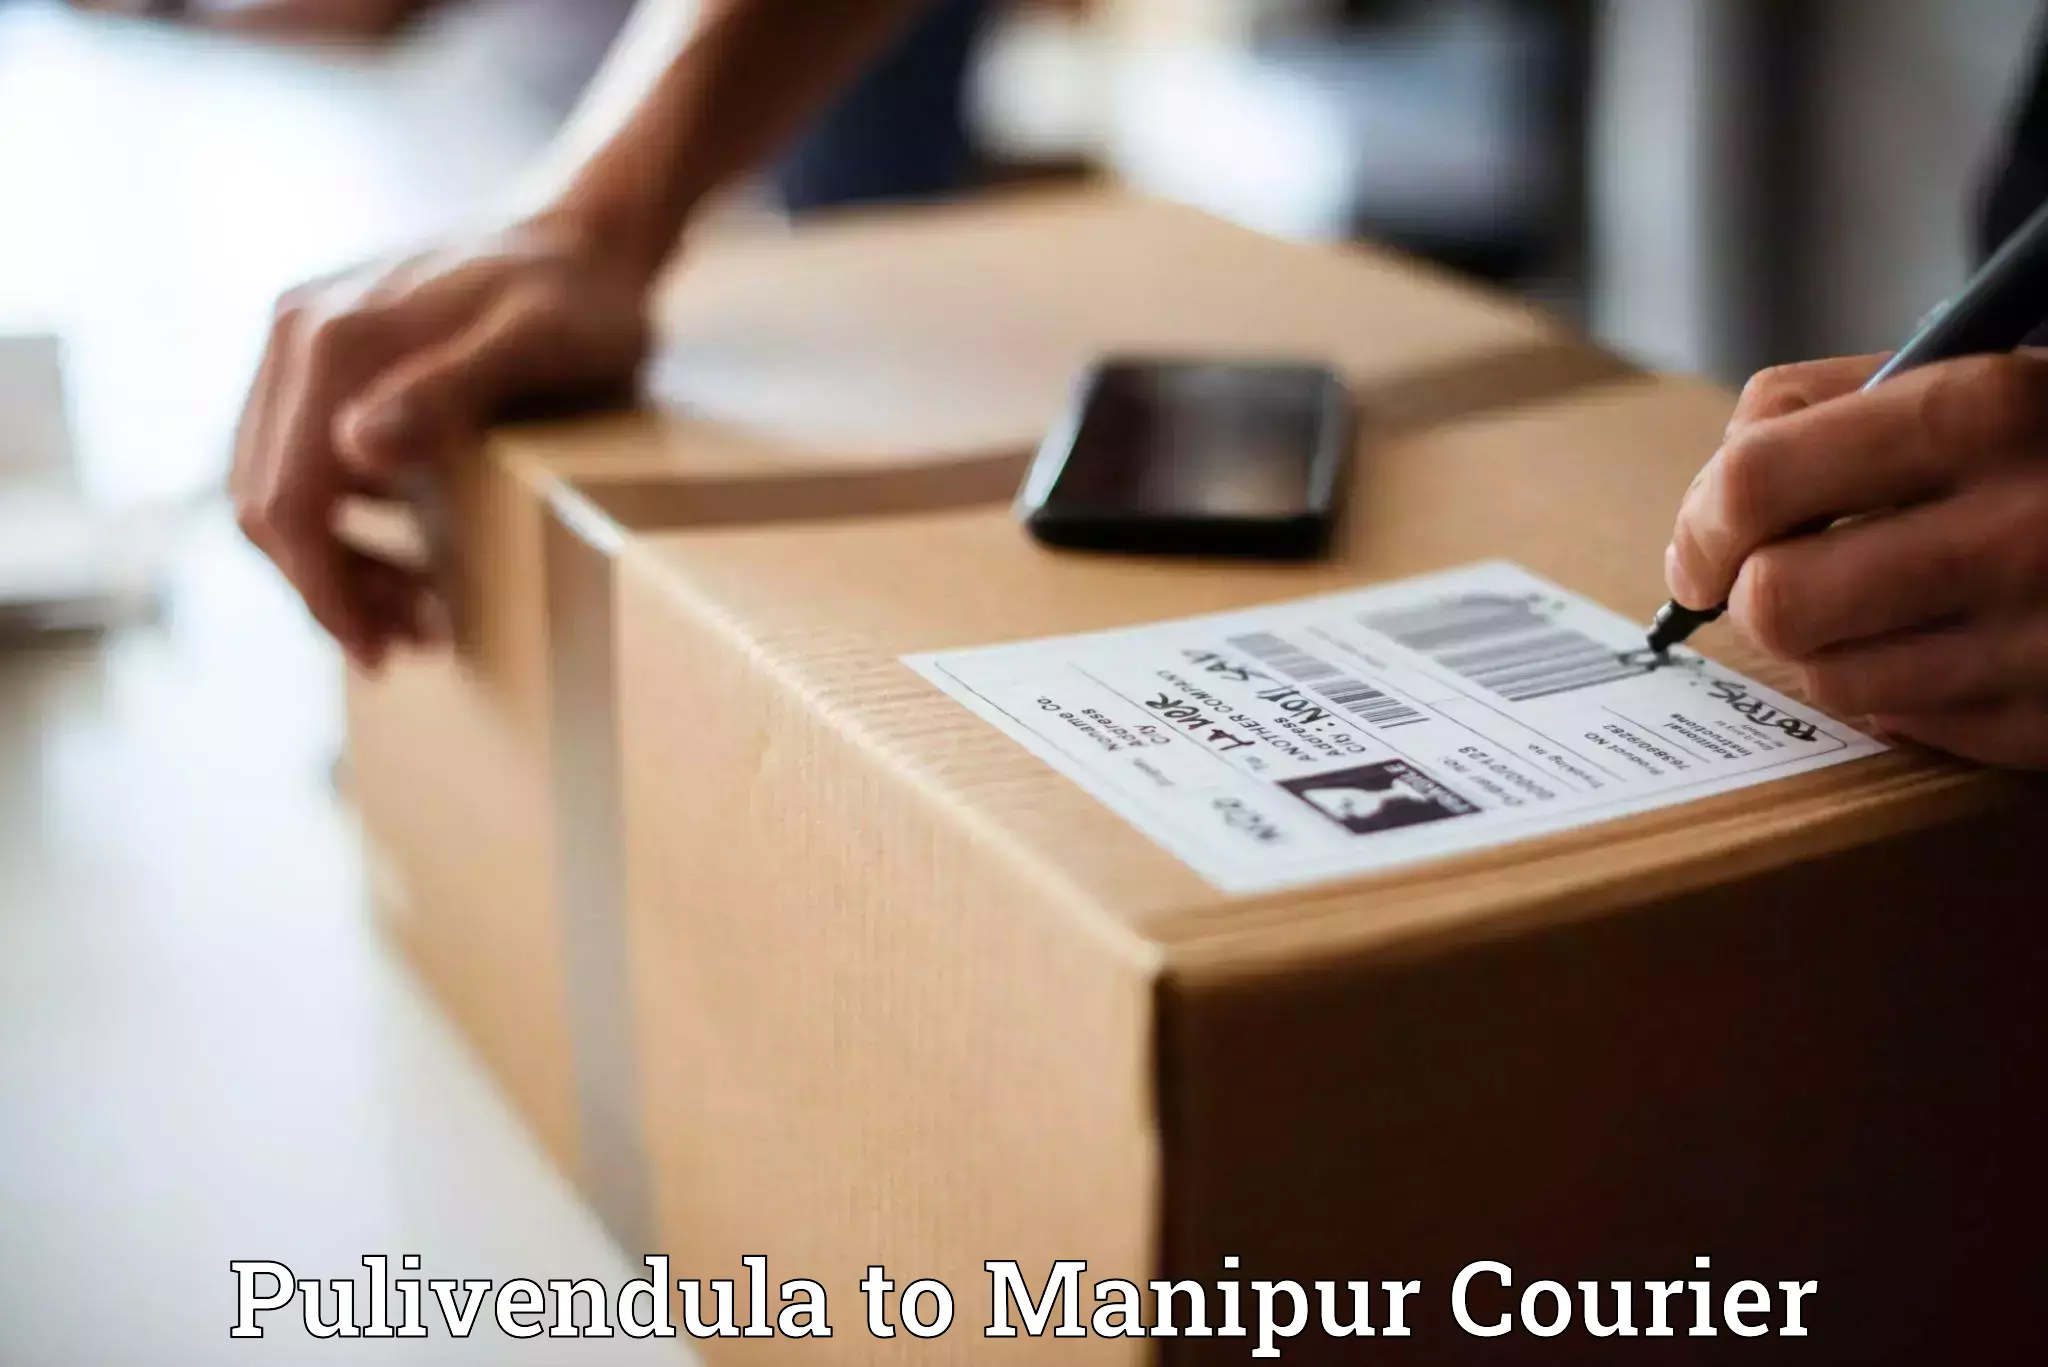 Package delivery network Pulivendula to Manipur